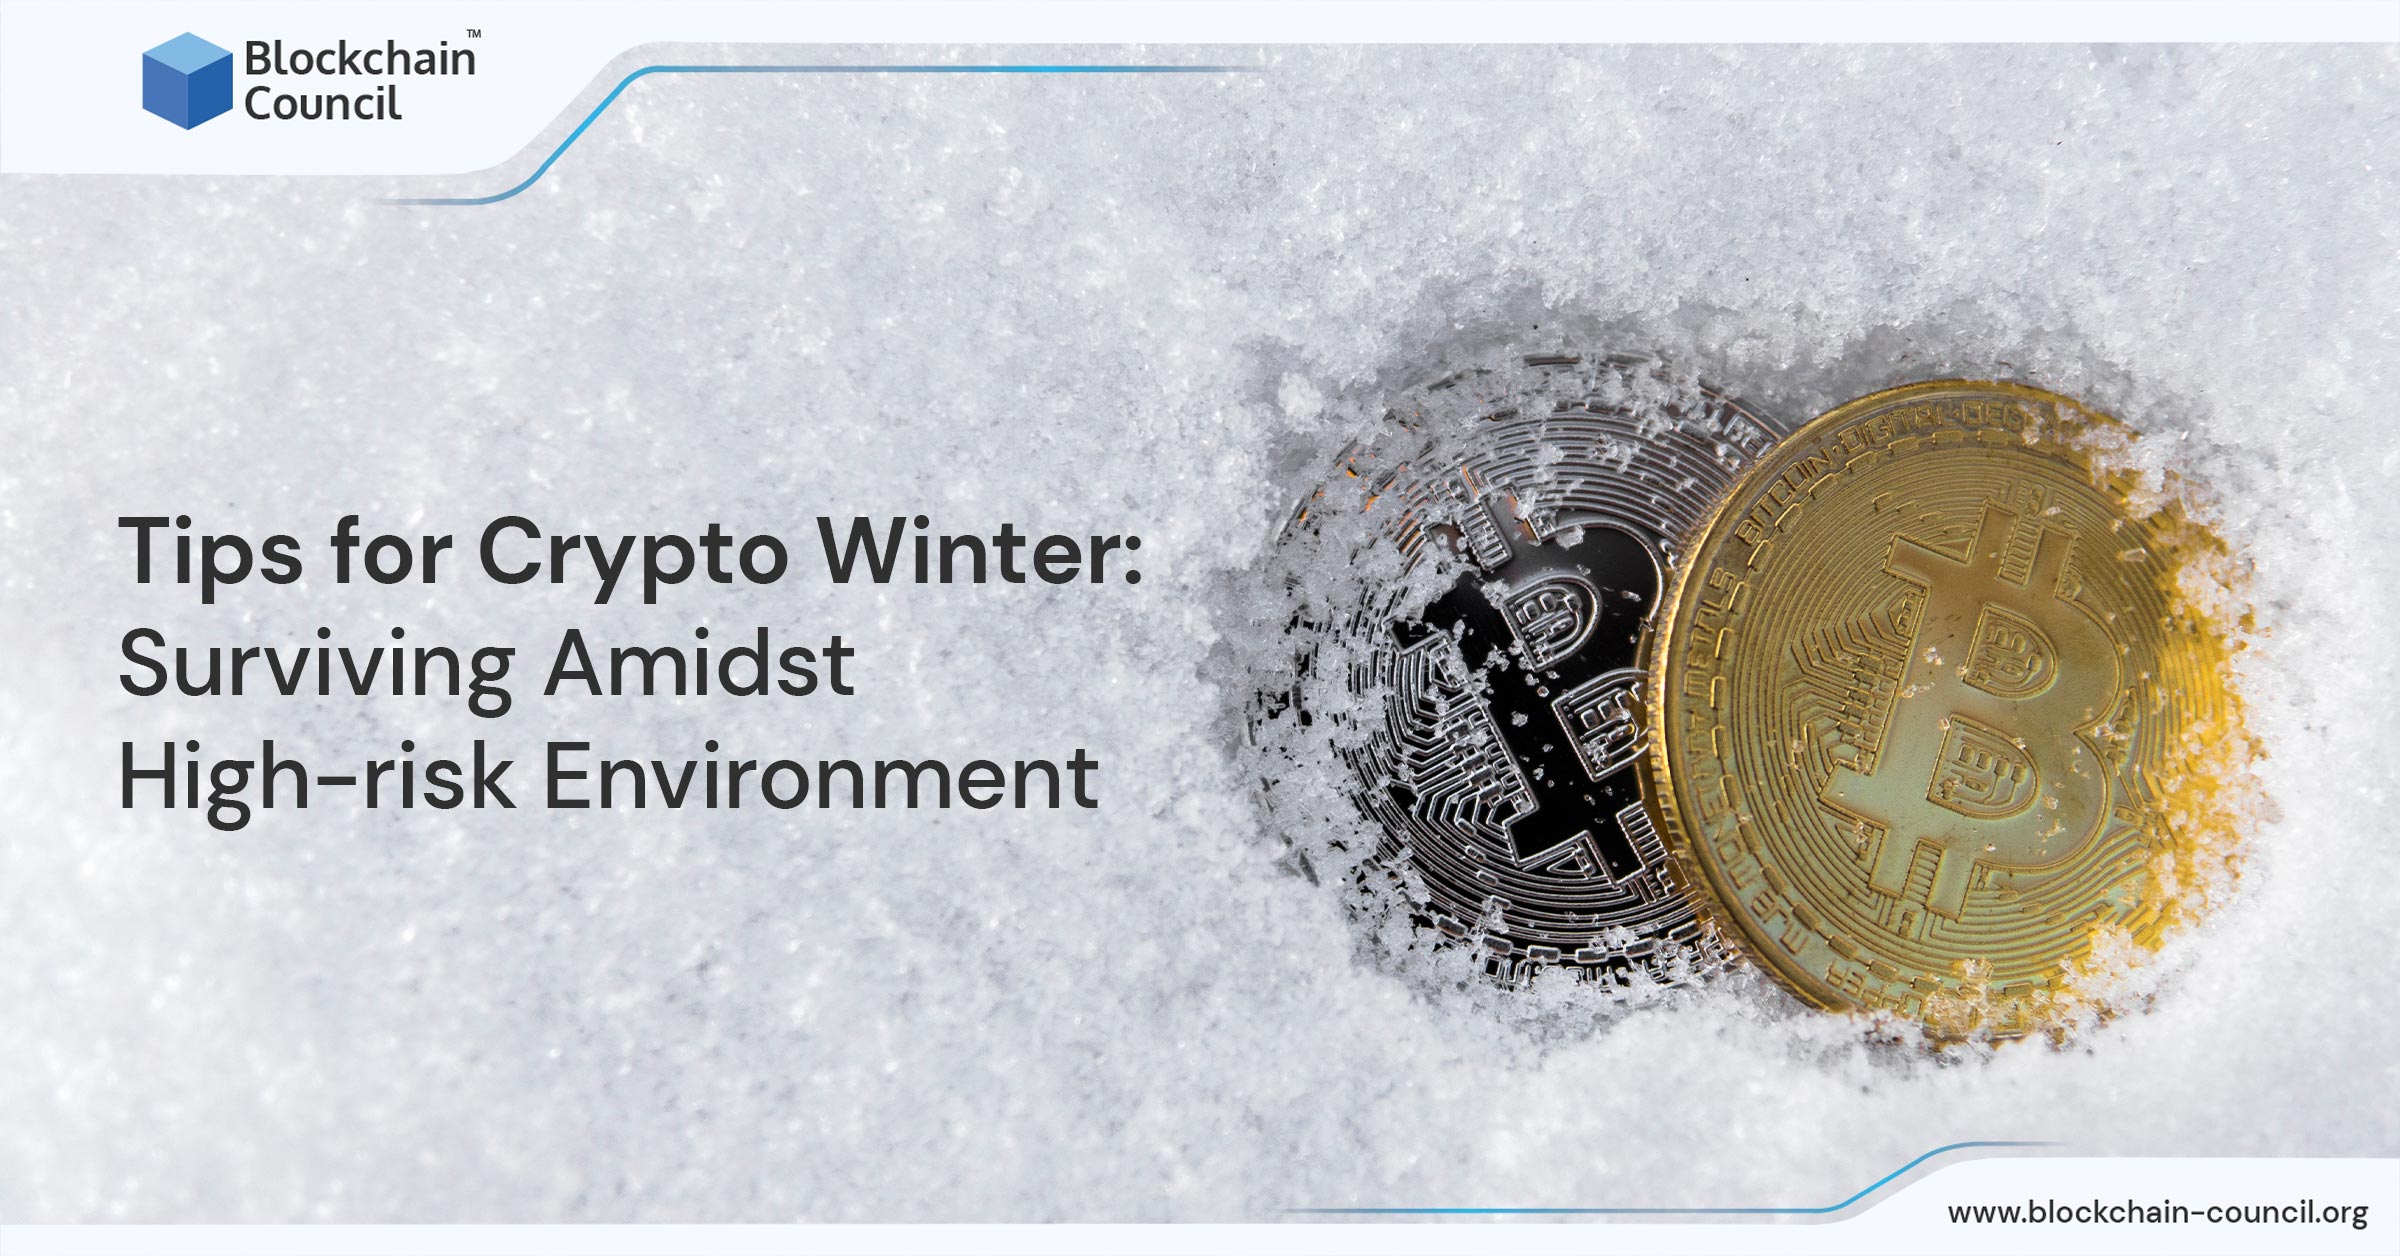 Tips for Crypto Winter: Surviving Amidst High-risk Environment